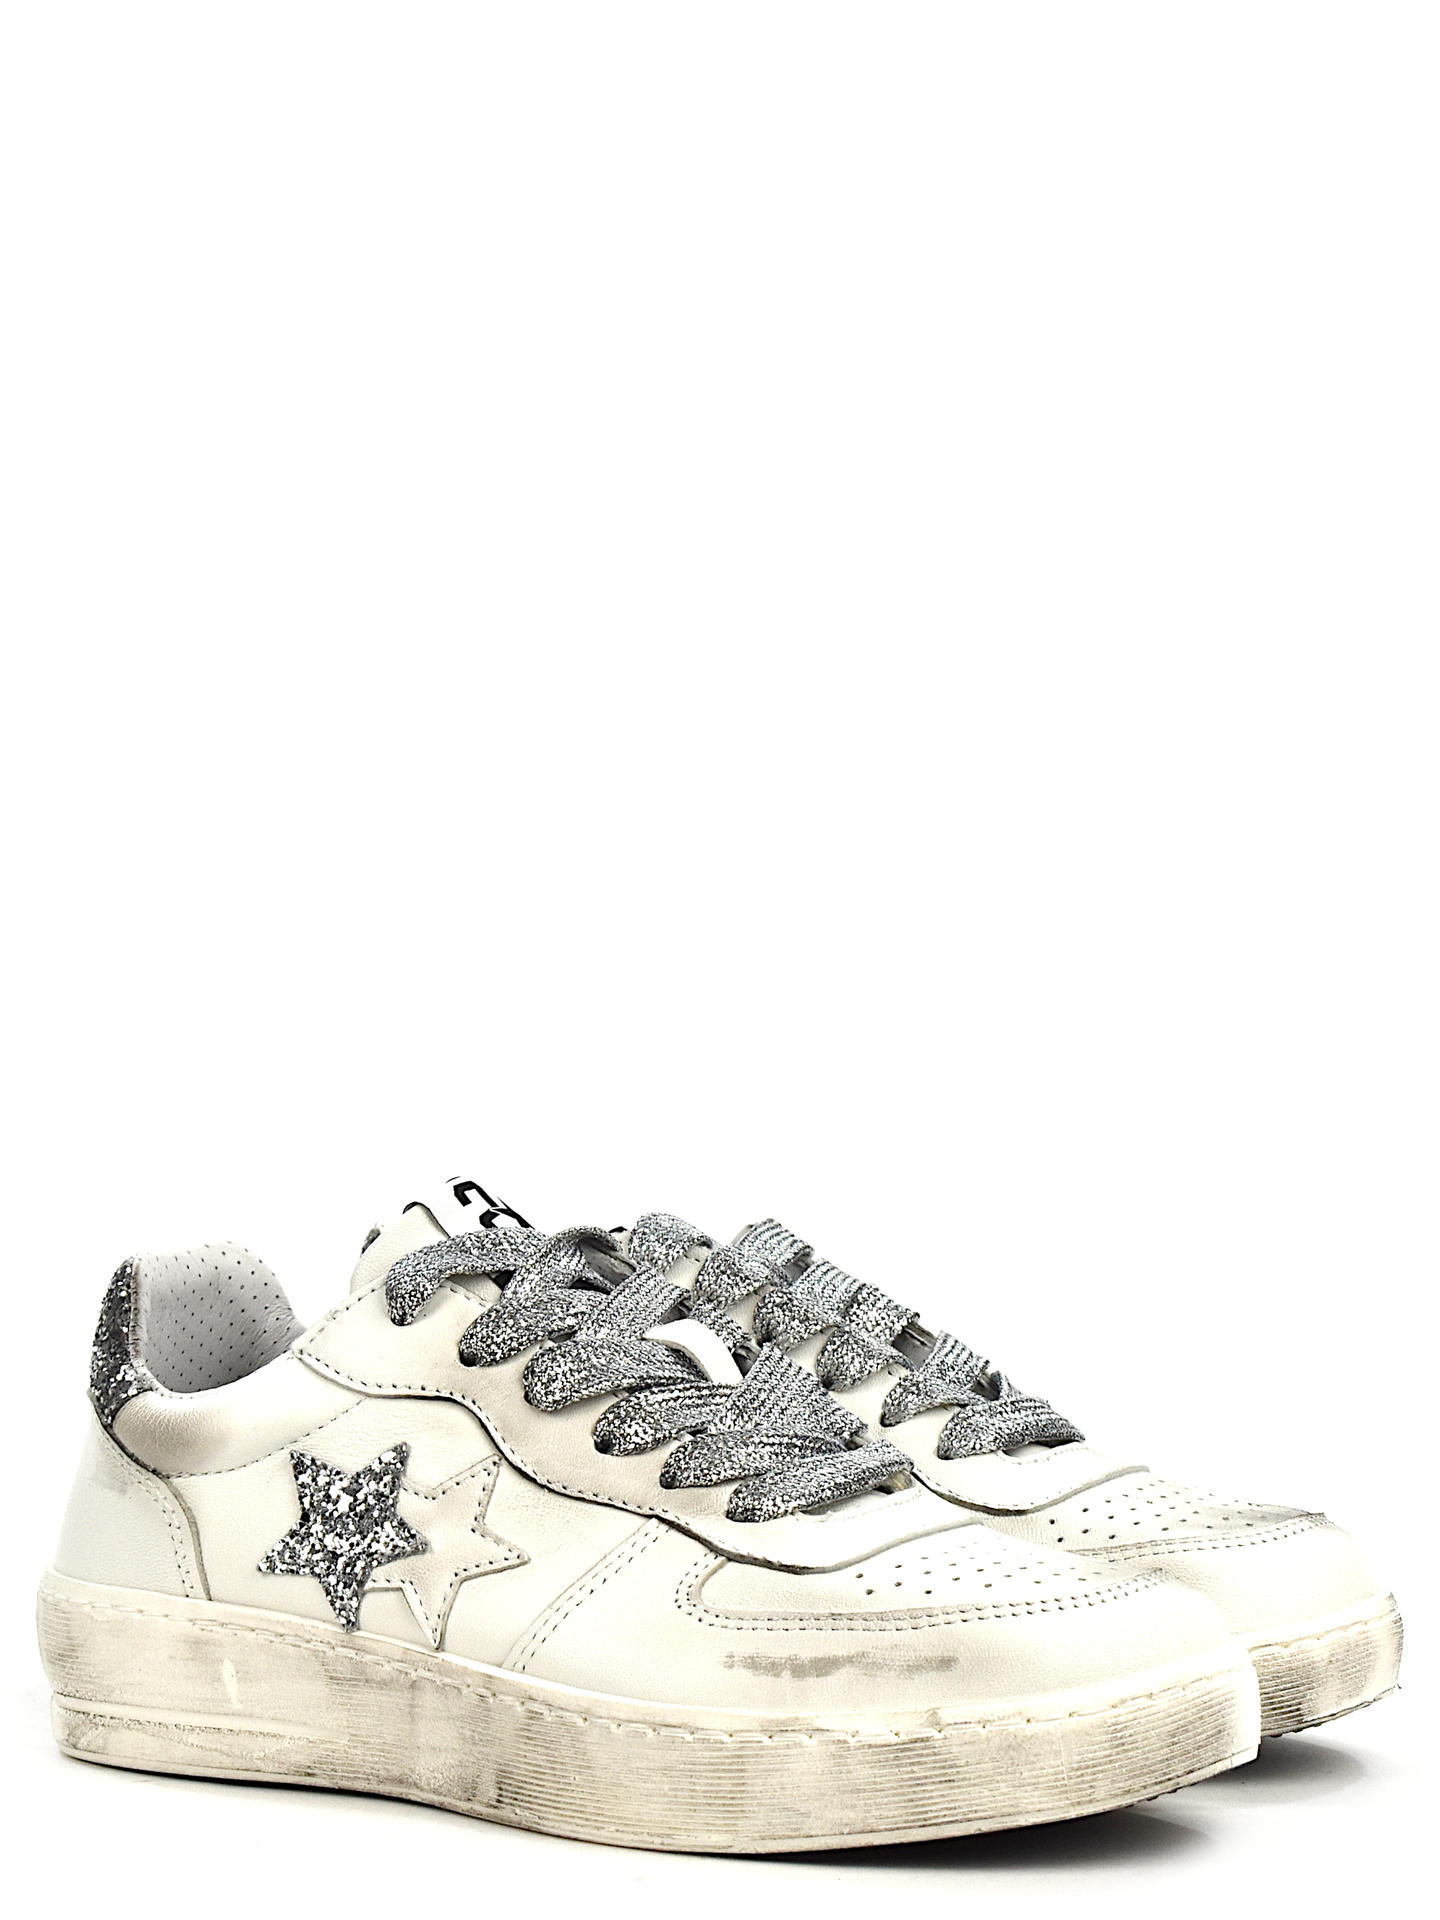 SNEAKERS 2STAR 4245 BIANCO/ARGENTO